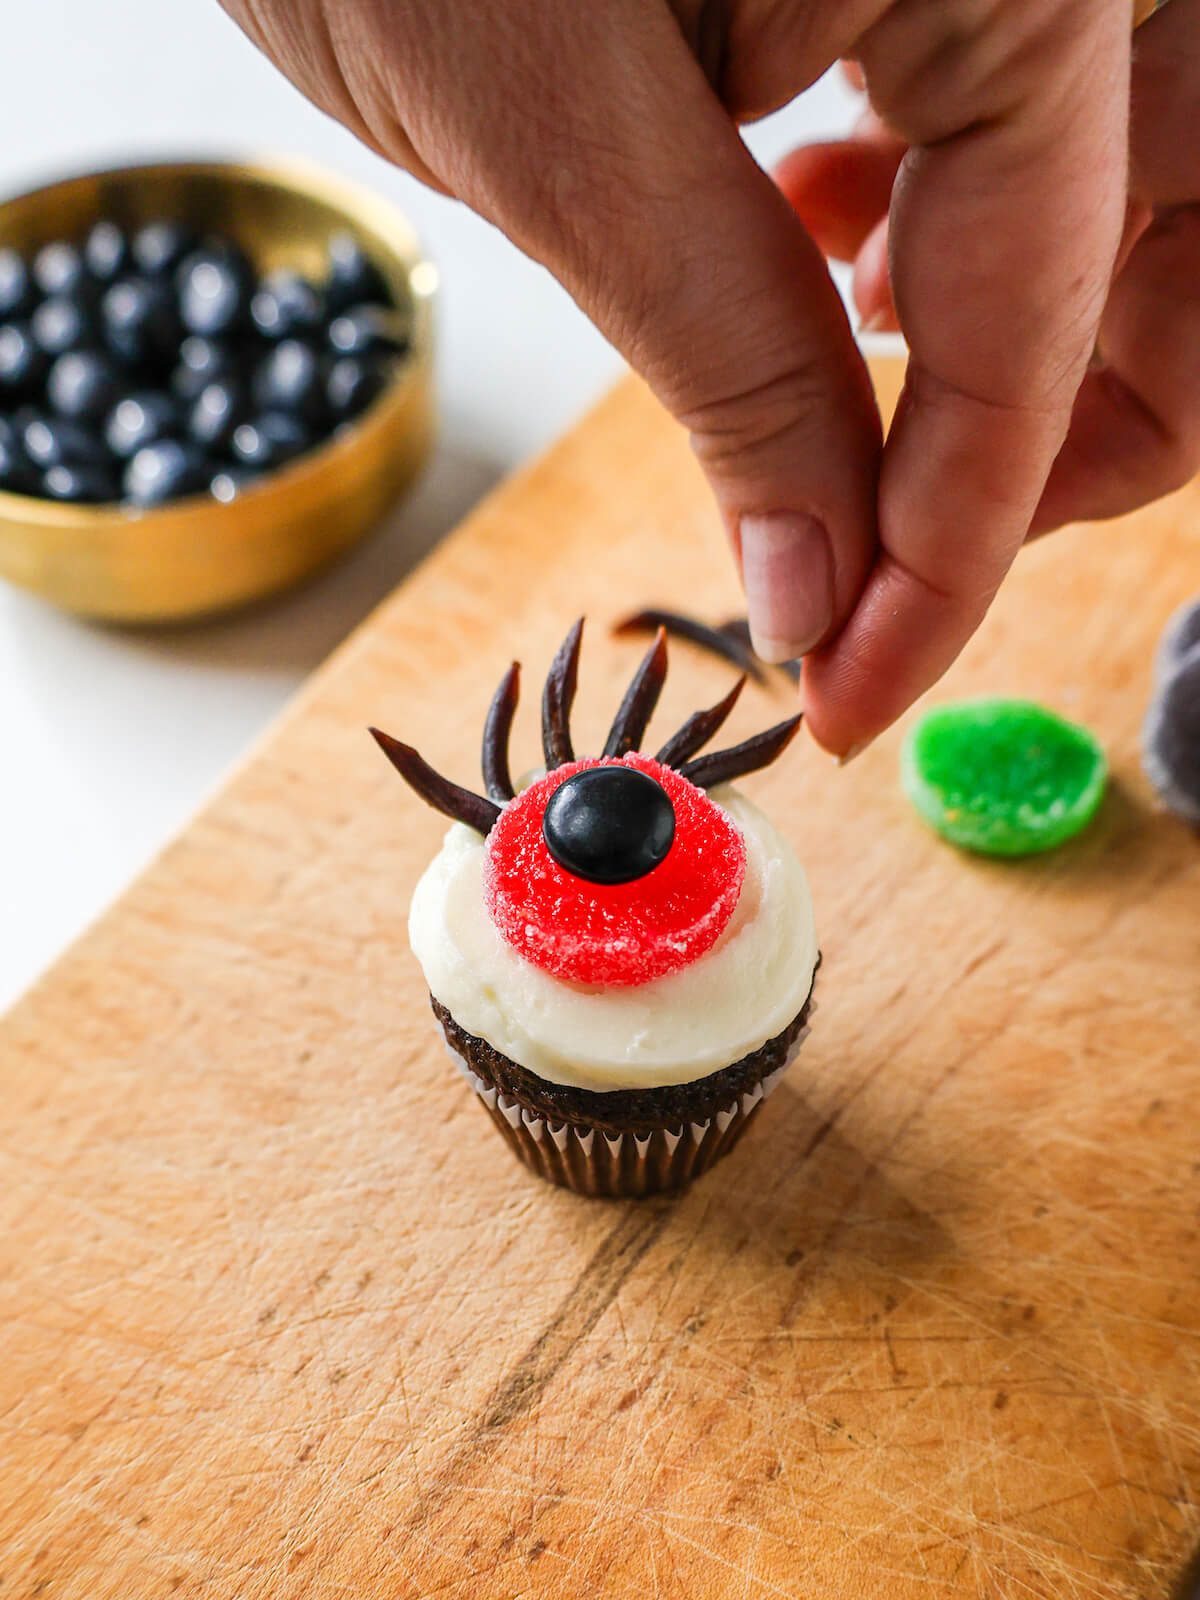 Finishing adding cut licorice laces on a white frosted cupcake with a candy eyeball to create eyelashes.